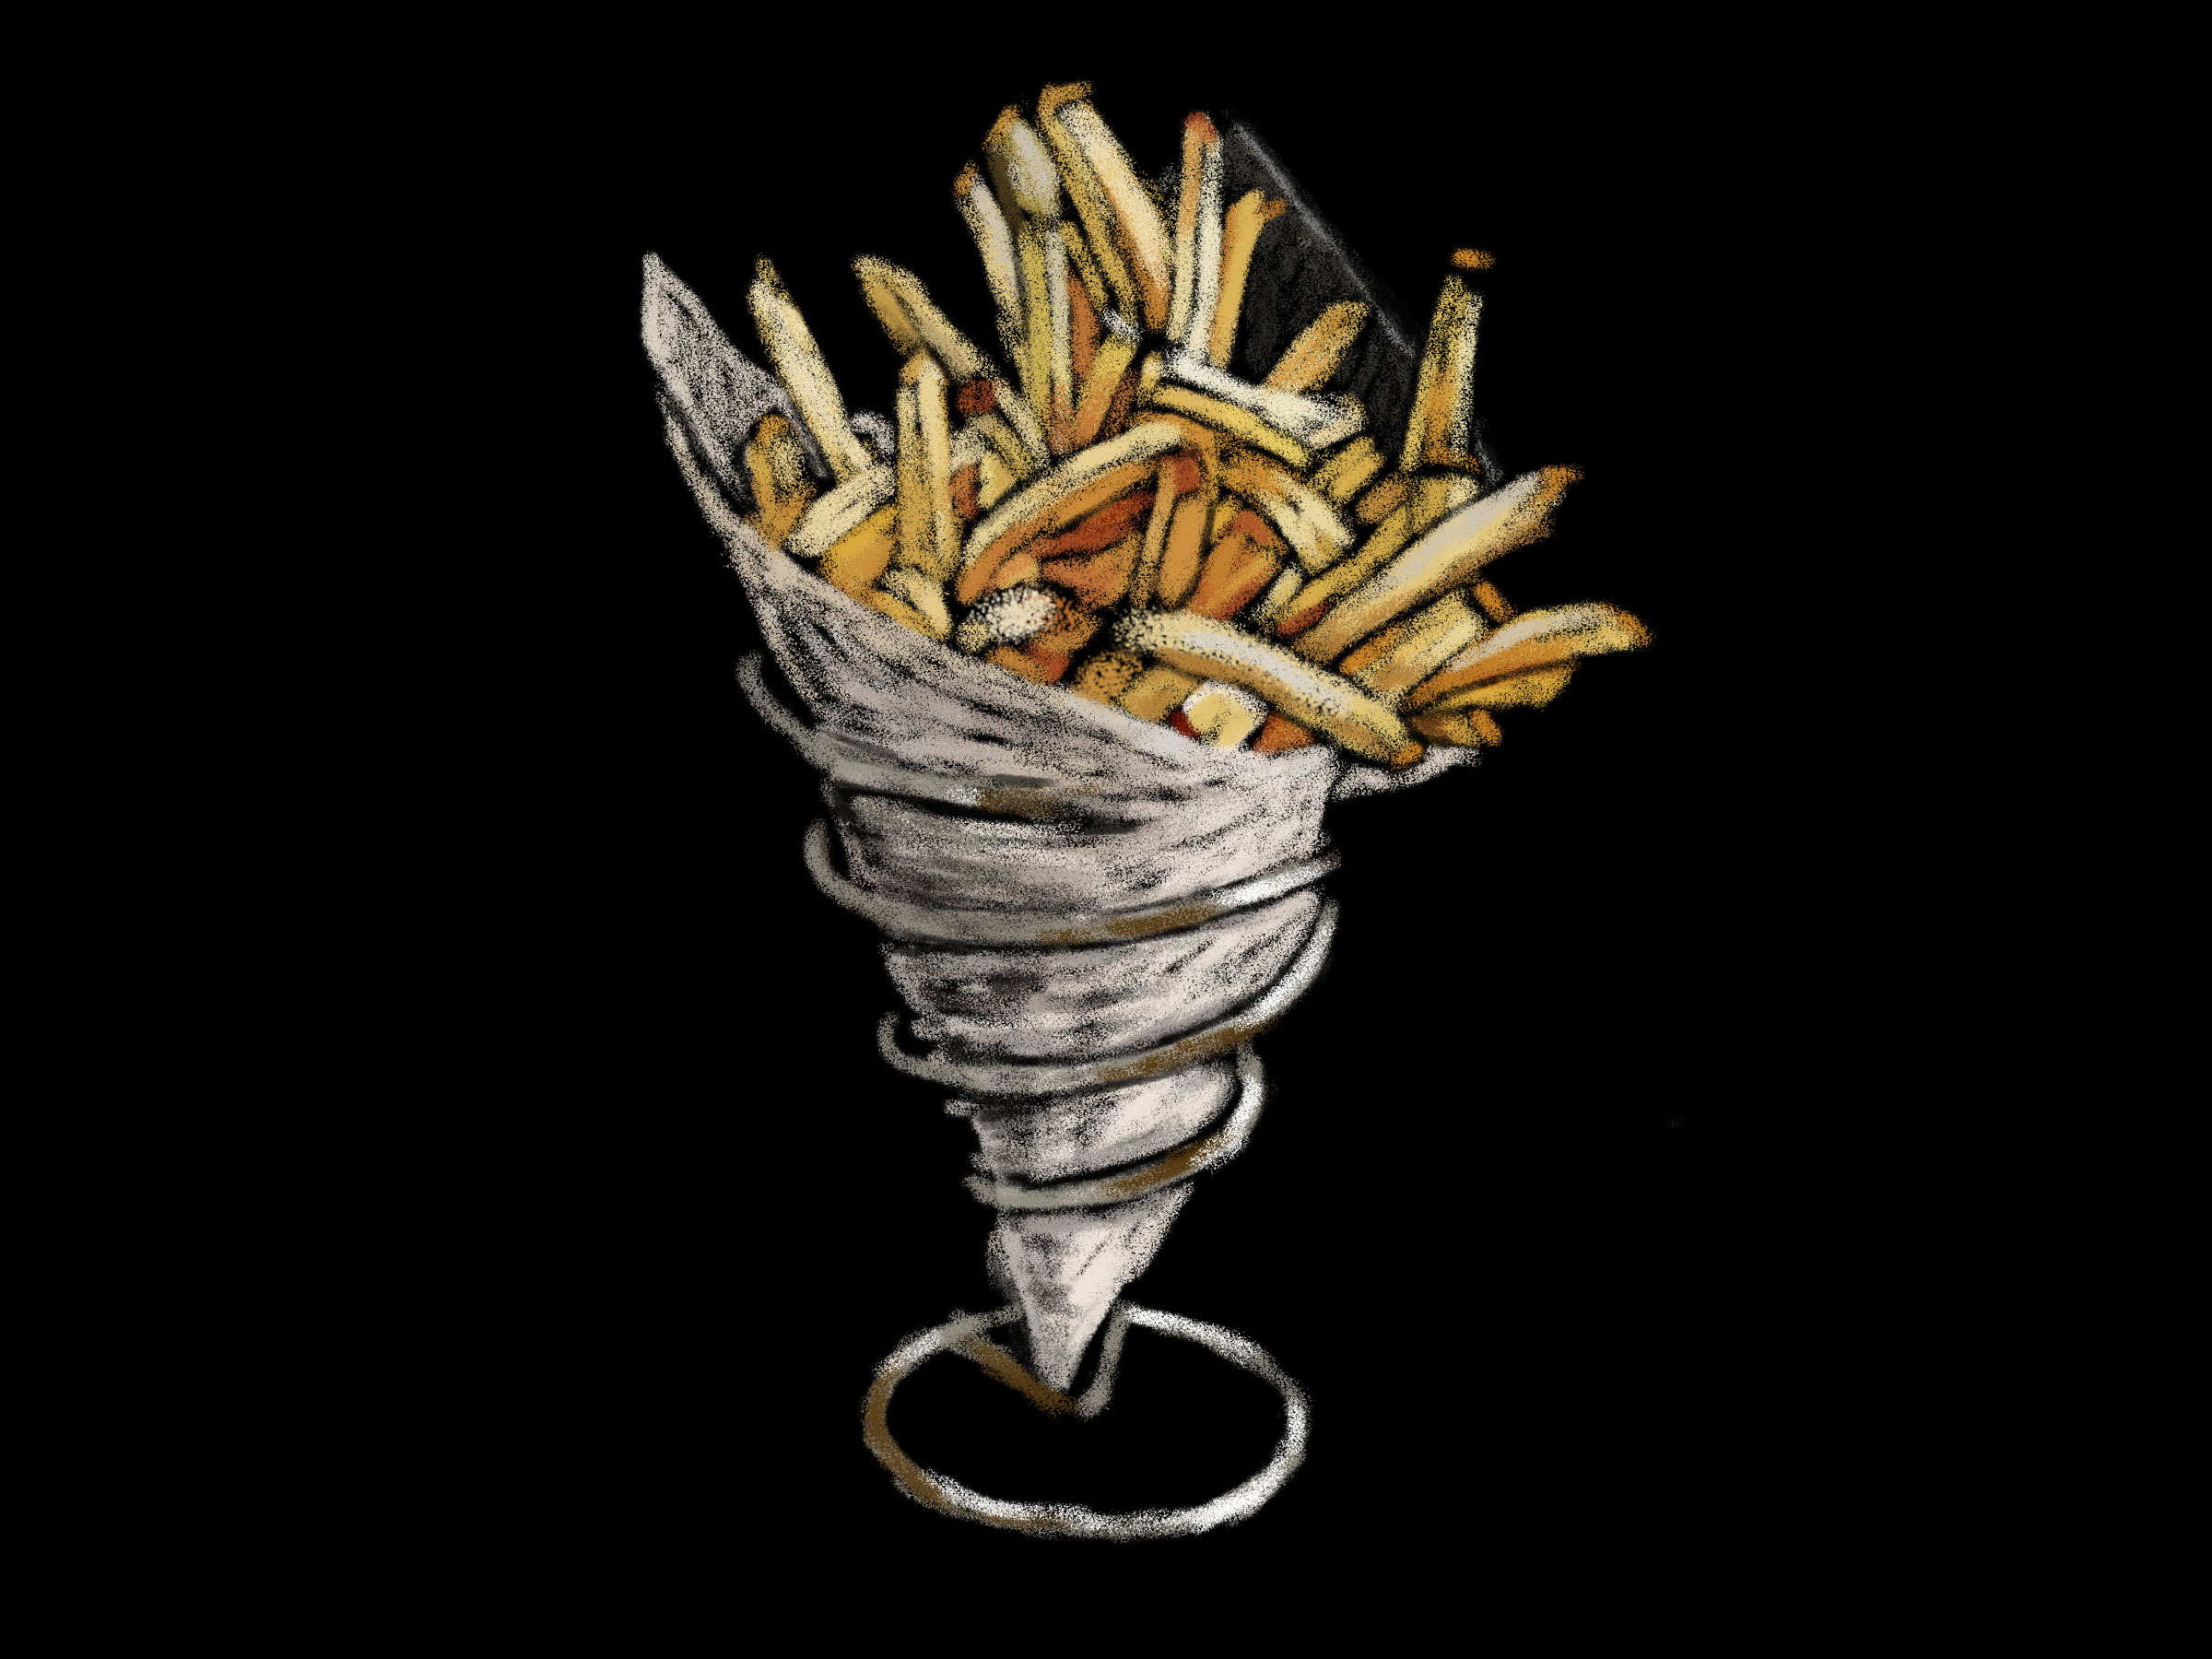 Chalk Drawing of French Fries